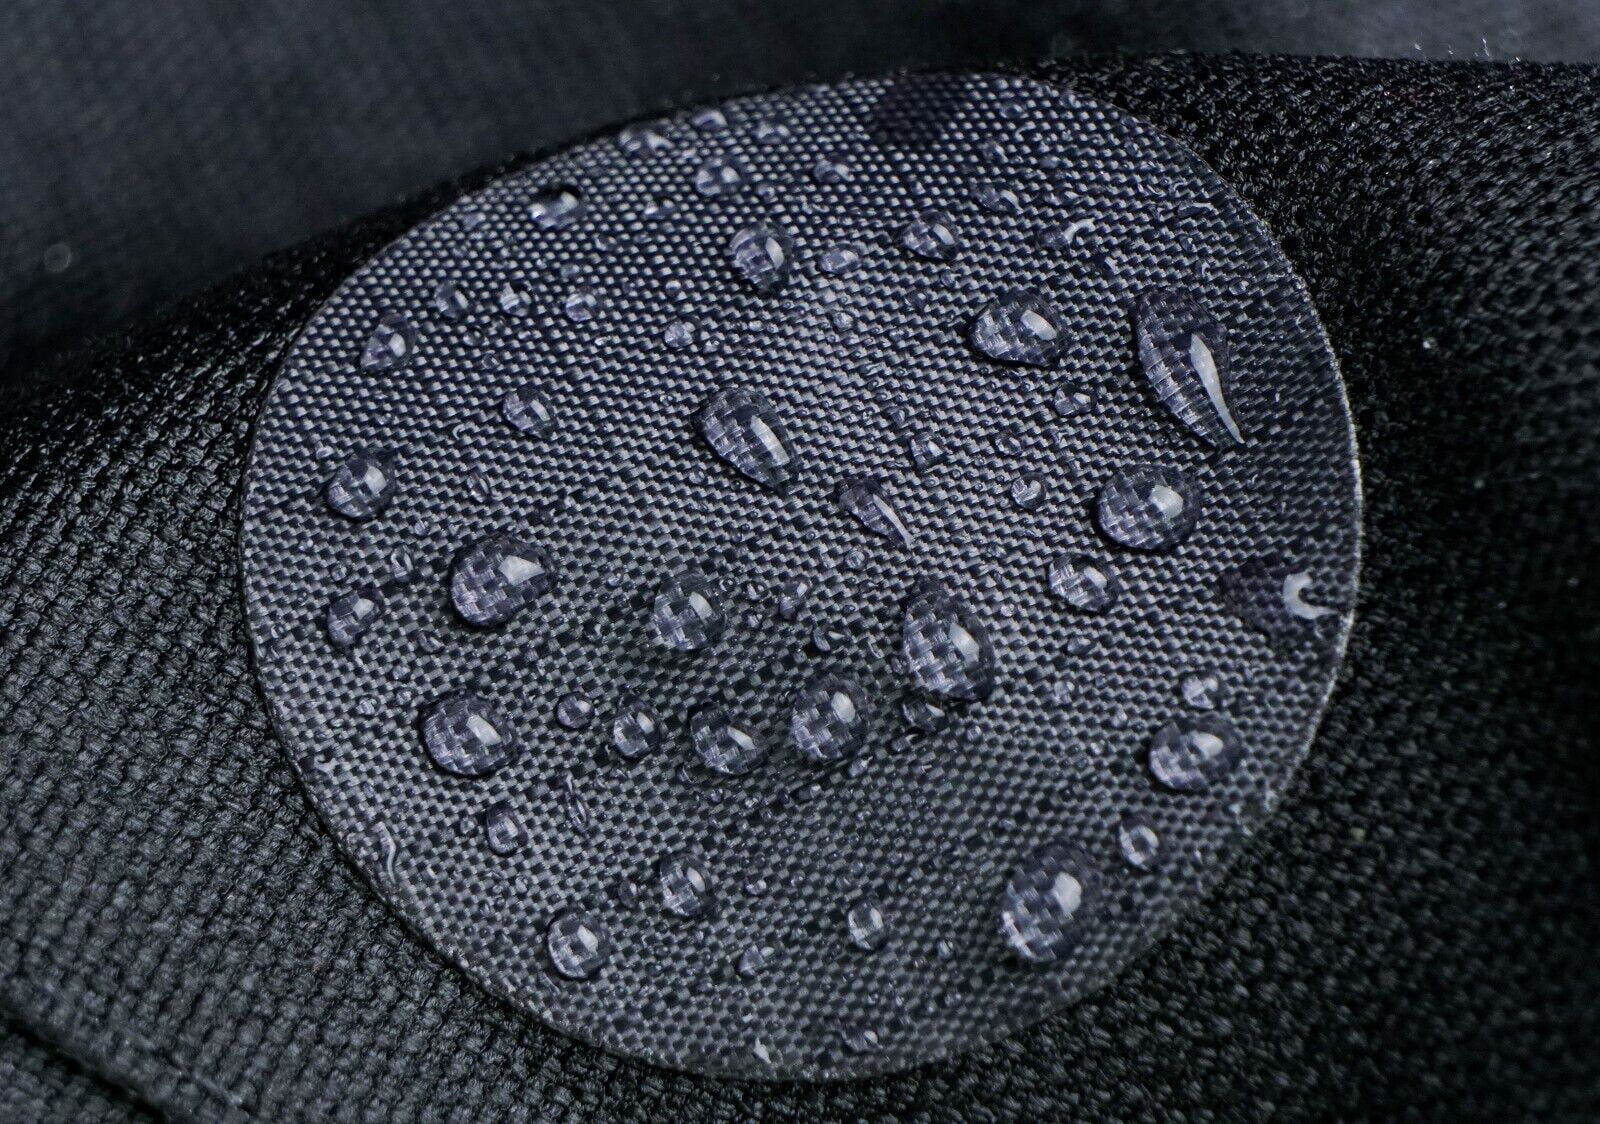 aZengear Down Jacket Repair Patches Pre-cut, Self-Adhesive, Soft,  Waterproof, Tear-Resistant Rip-Stop Nylon Fabric to Fix Holes